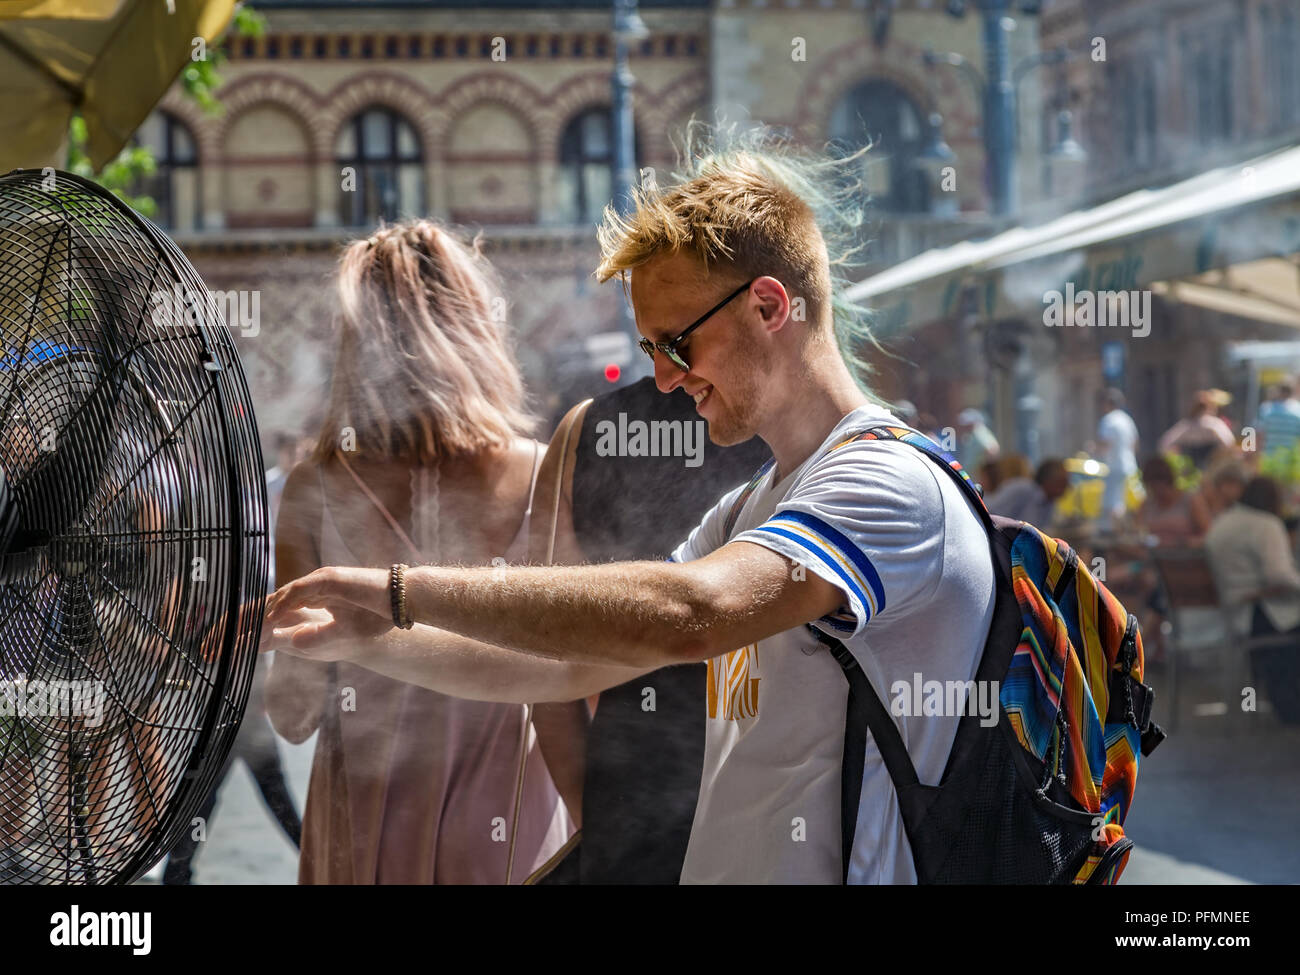 BUDAPEST,HUNGARY-AUGUST 09,2018:People alleviate the summer heat wave in front of the water spraying fan at the street of downtown. Stock Photo